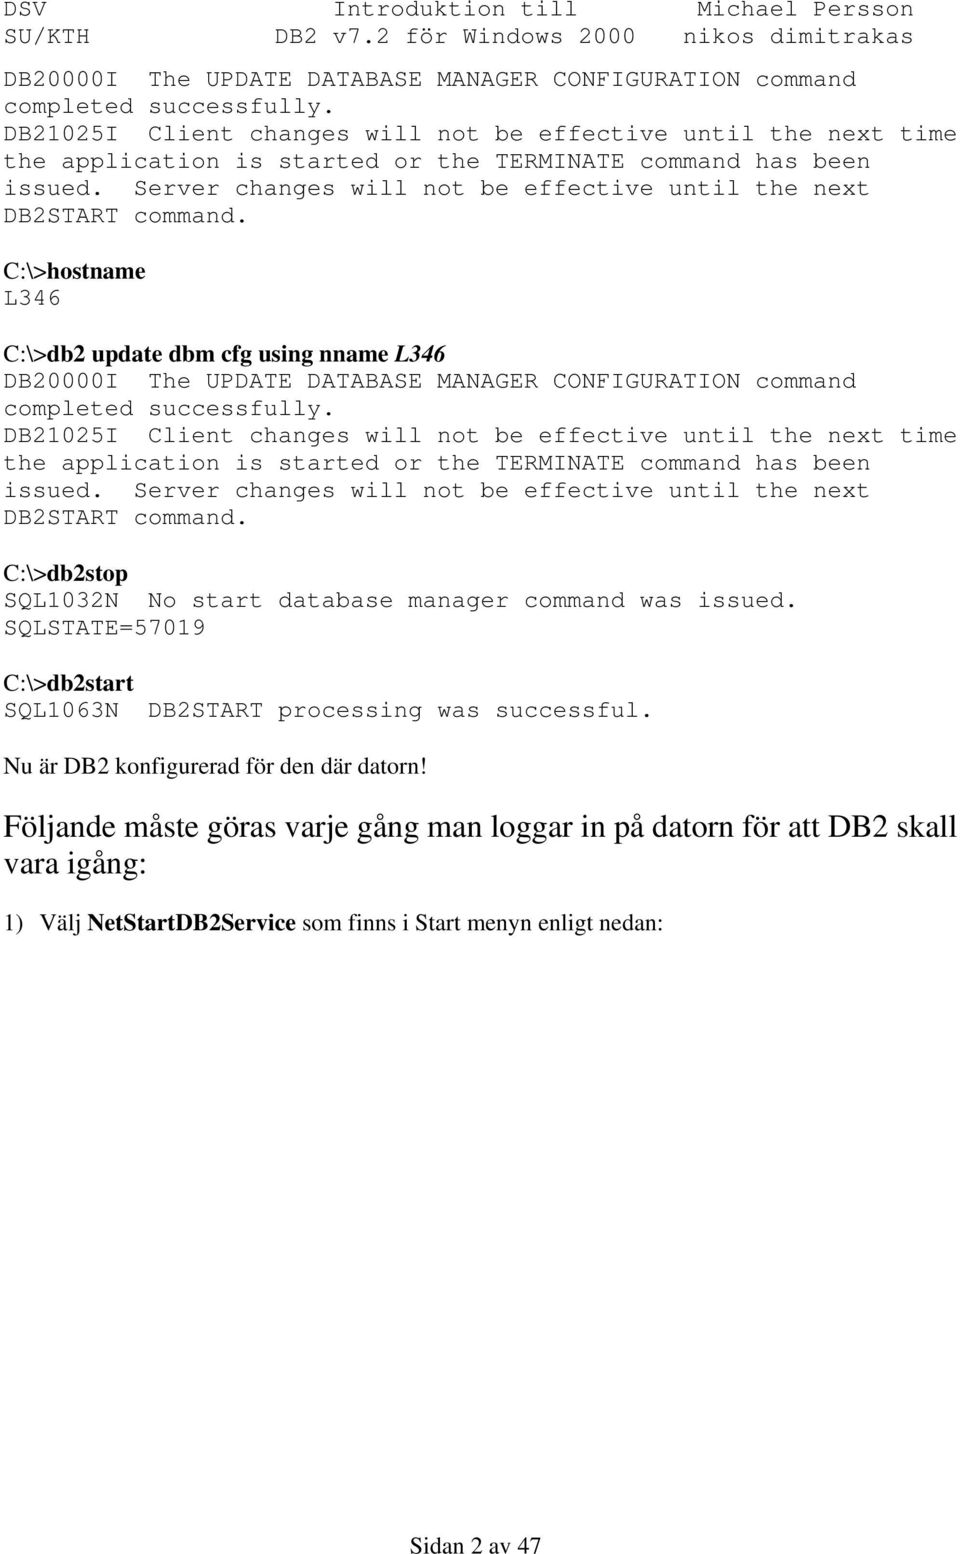 Server changes will not be effective until the next DB2START command. C:\>hostname L346 C:\>db2 update dbm cfg using nname L346   Server changes will not be effective until the next DB2START command.